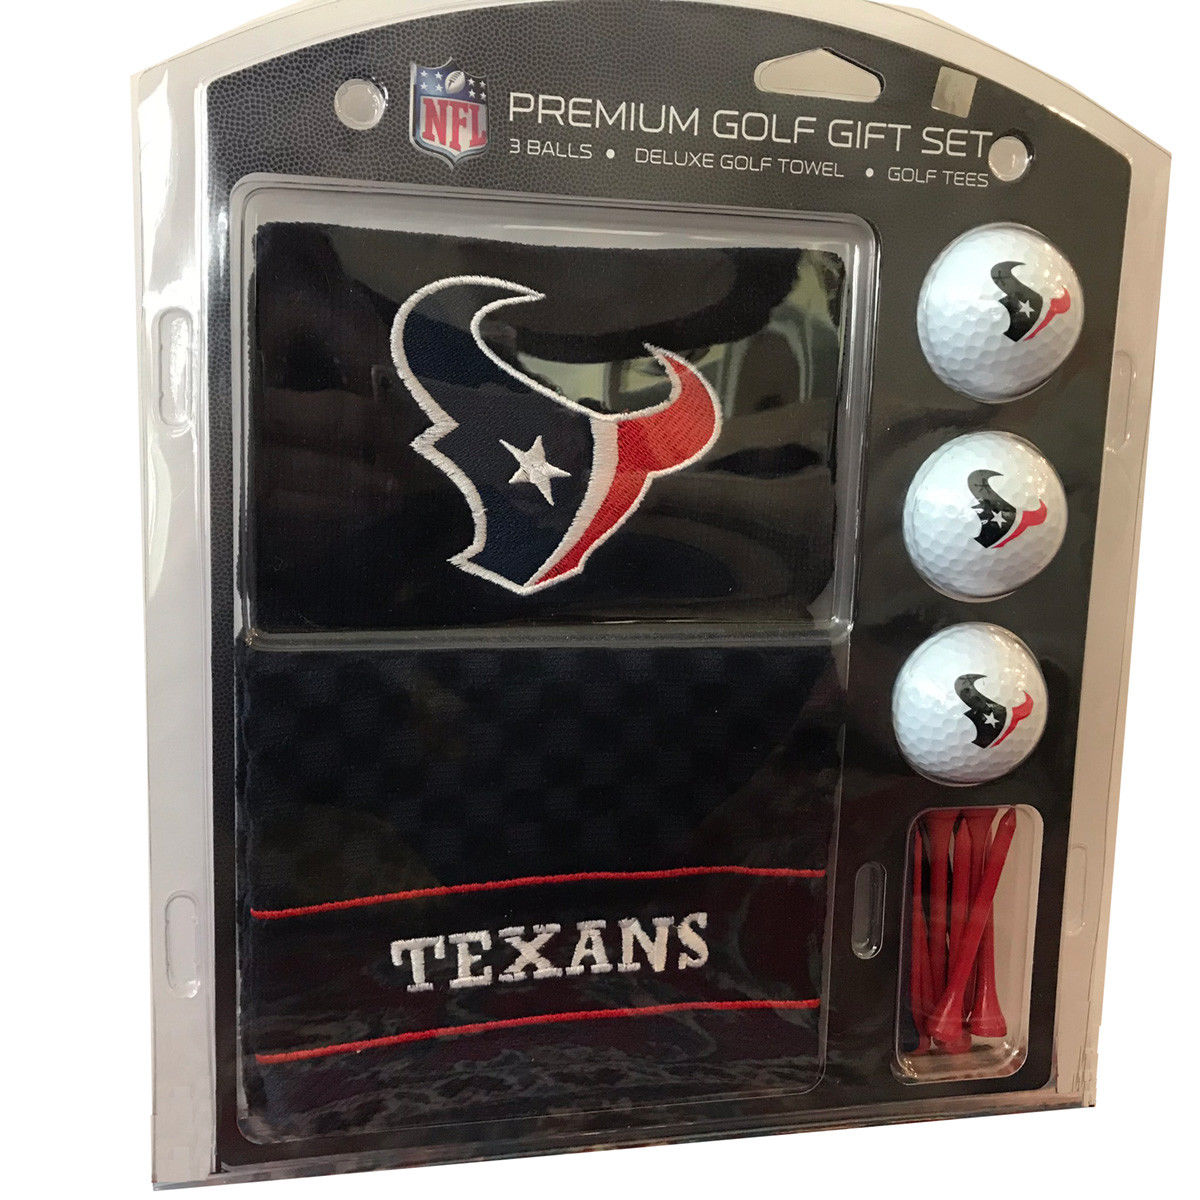 Houston Texans Embroidered Golf Towel Gift Set